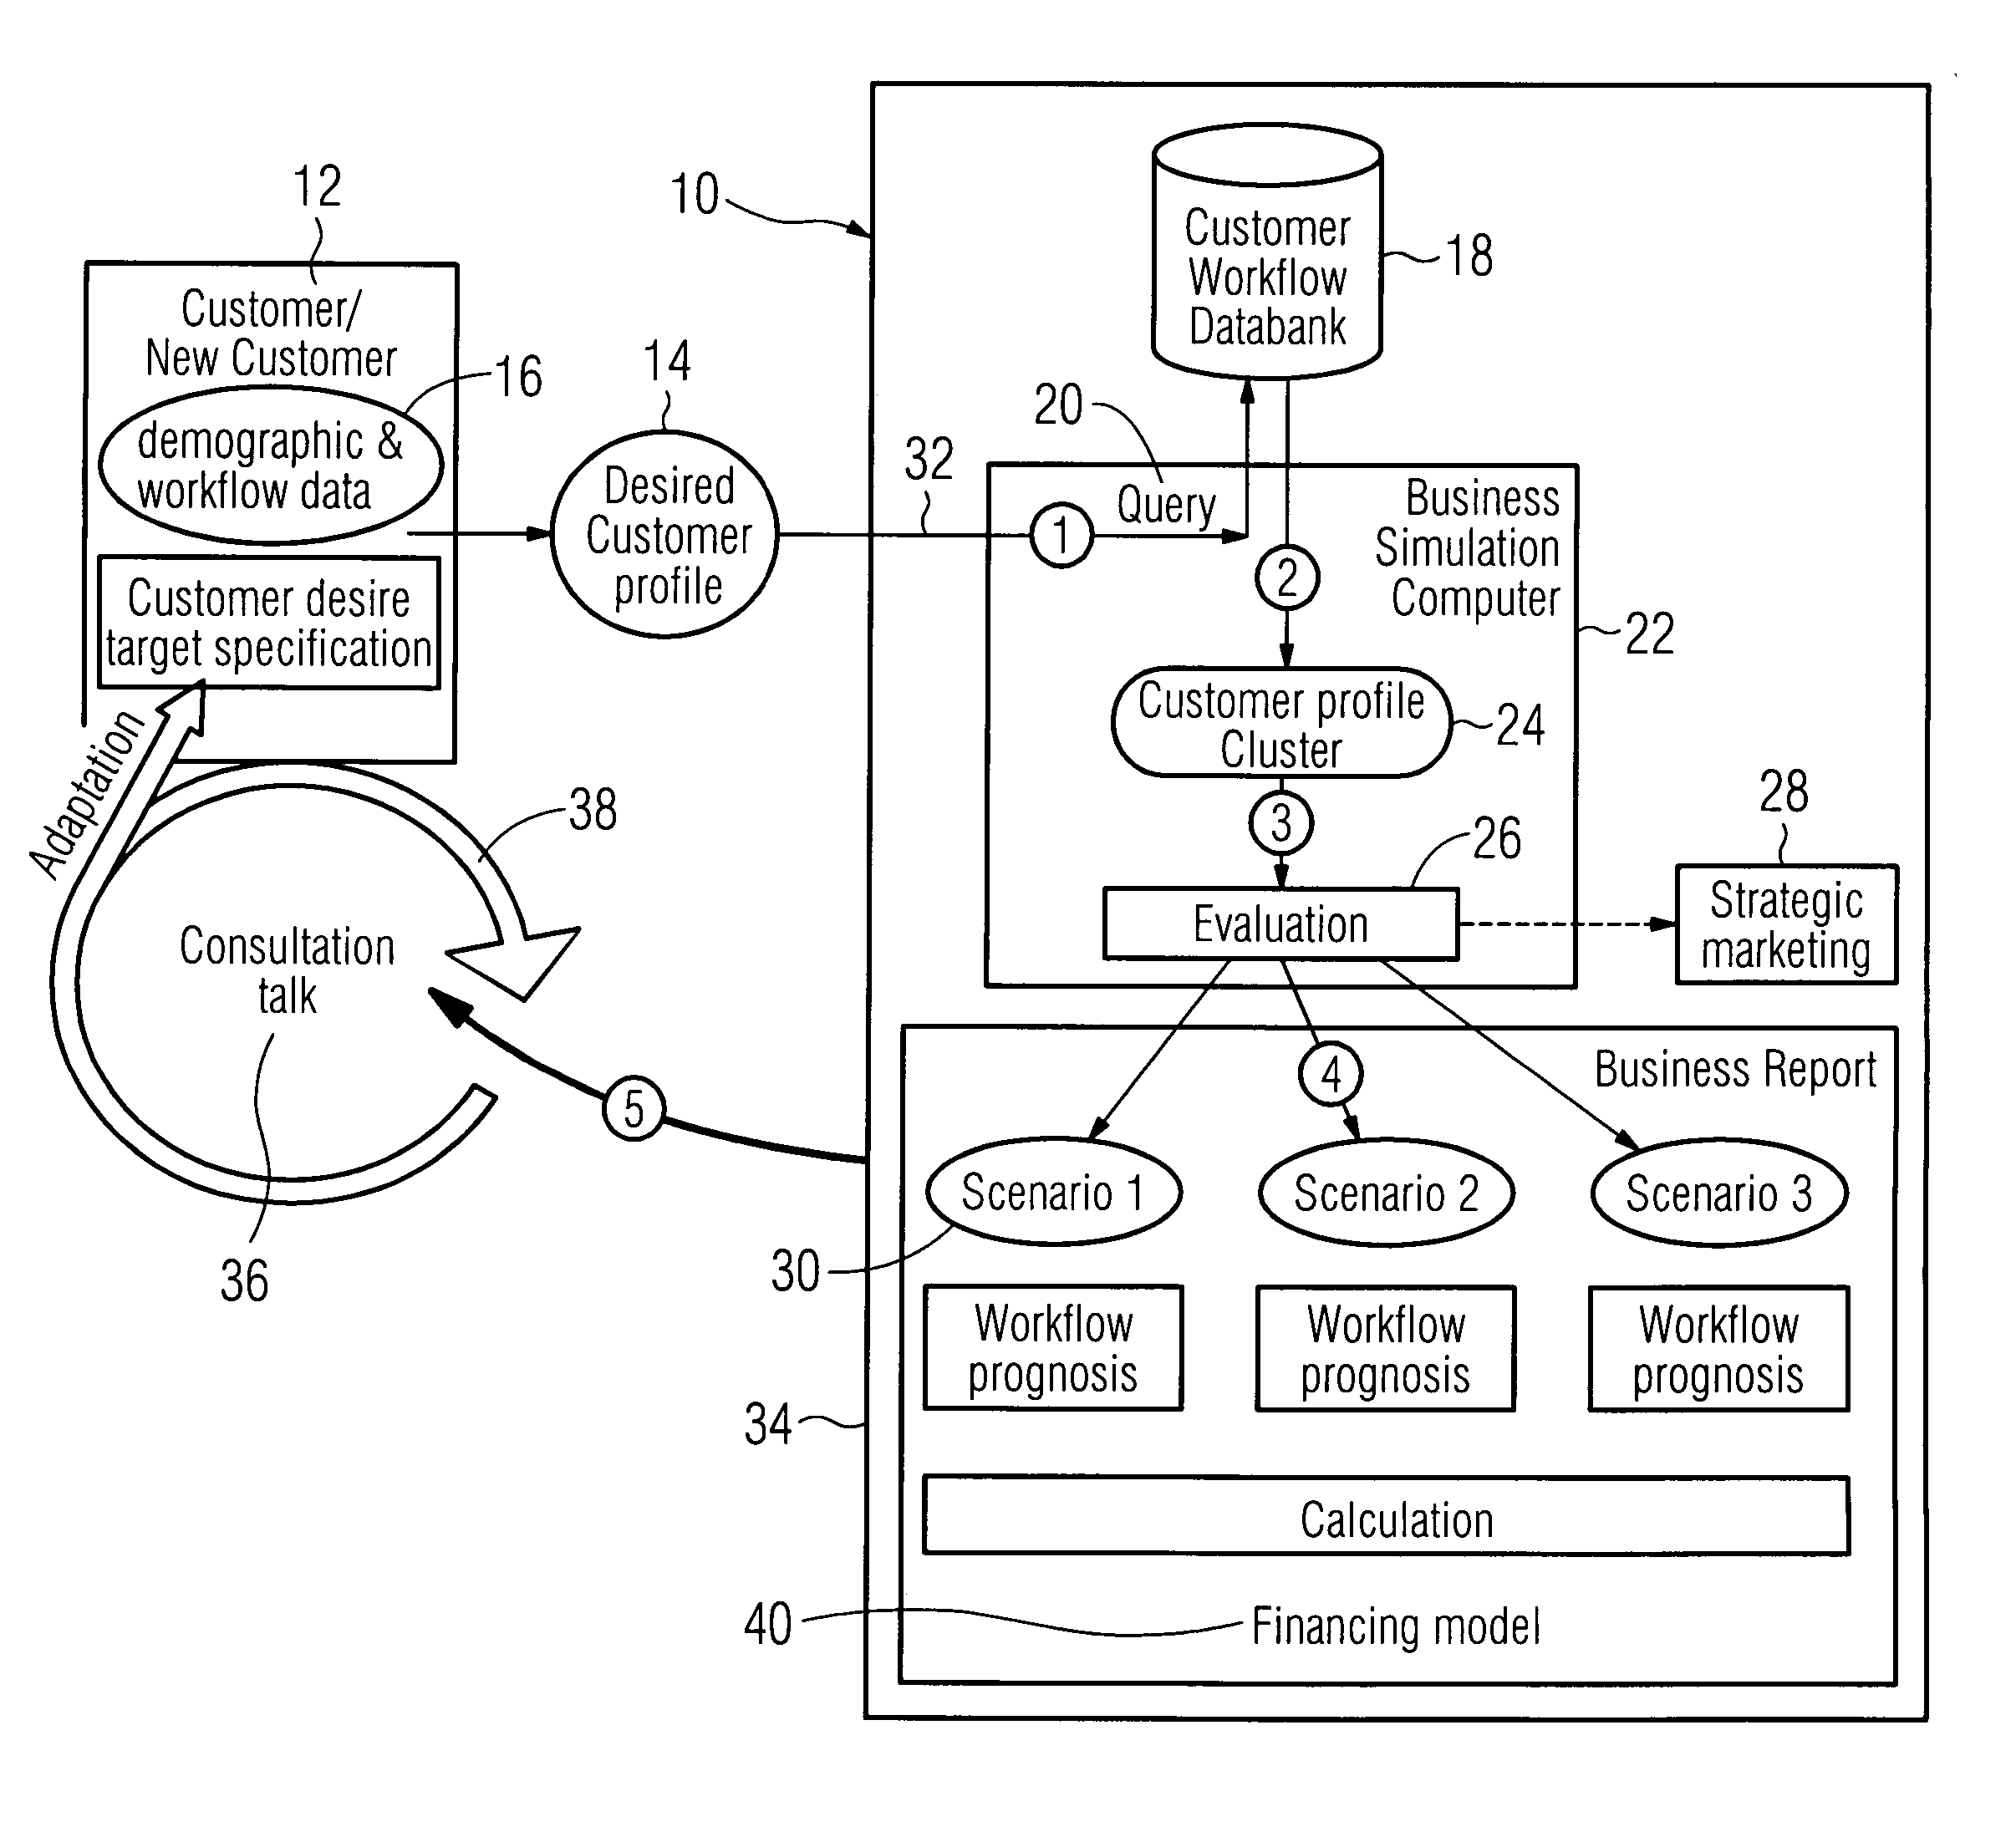 Business simulator method and apparatus based on clinical workflow parameters